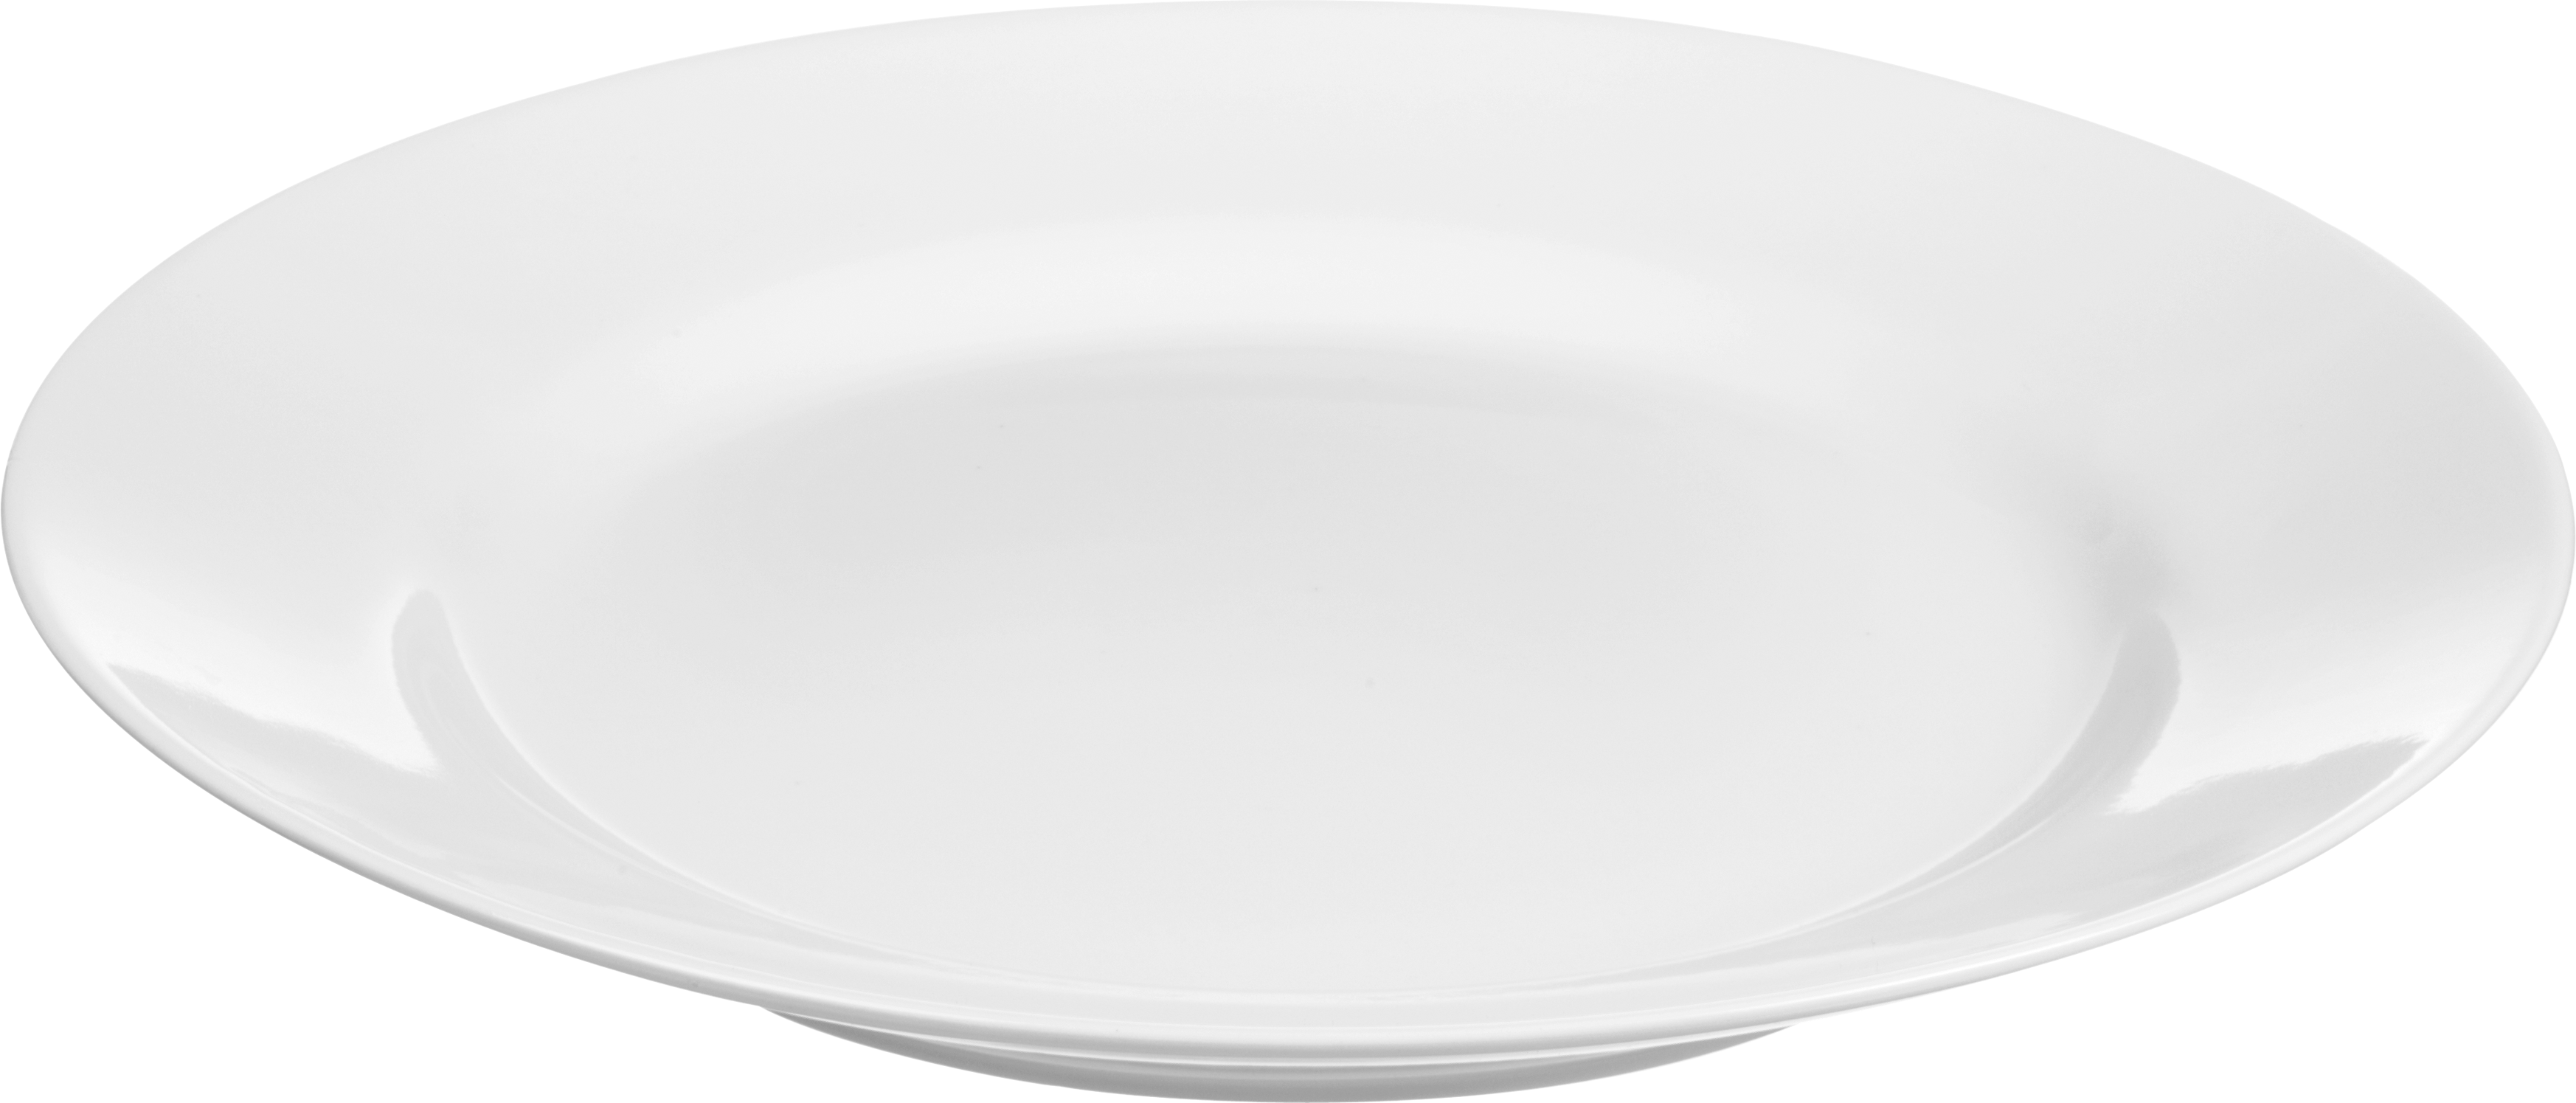 White Basic Plate PNG Image